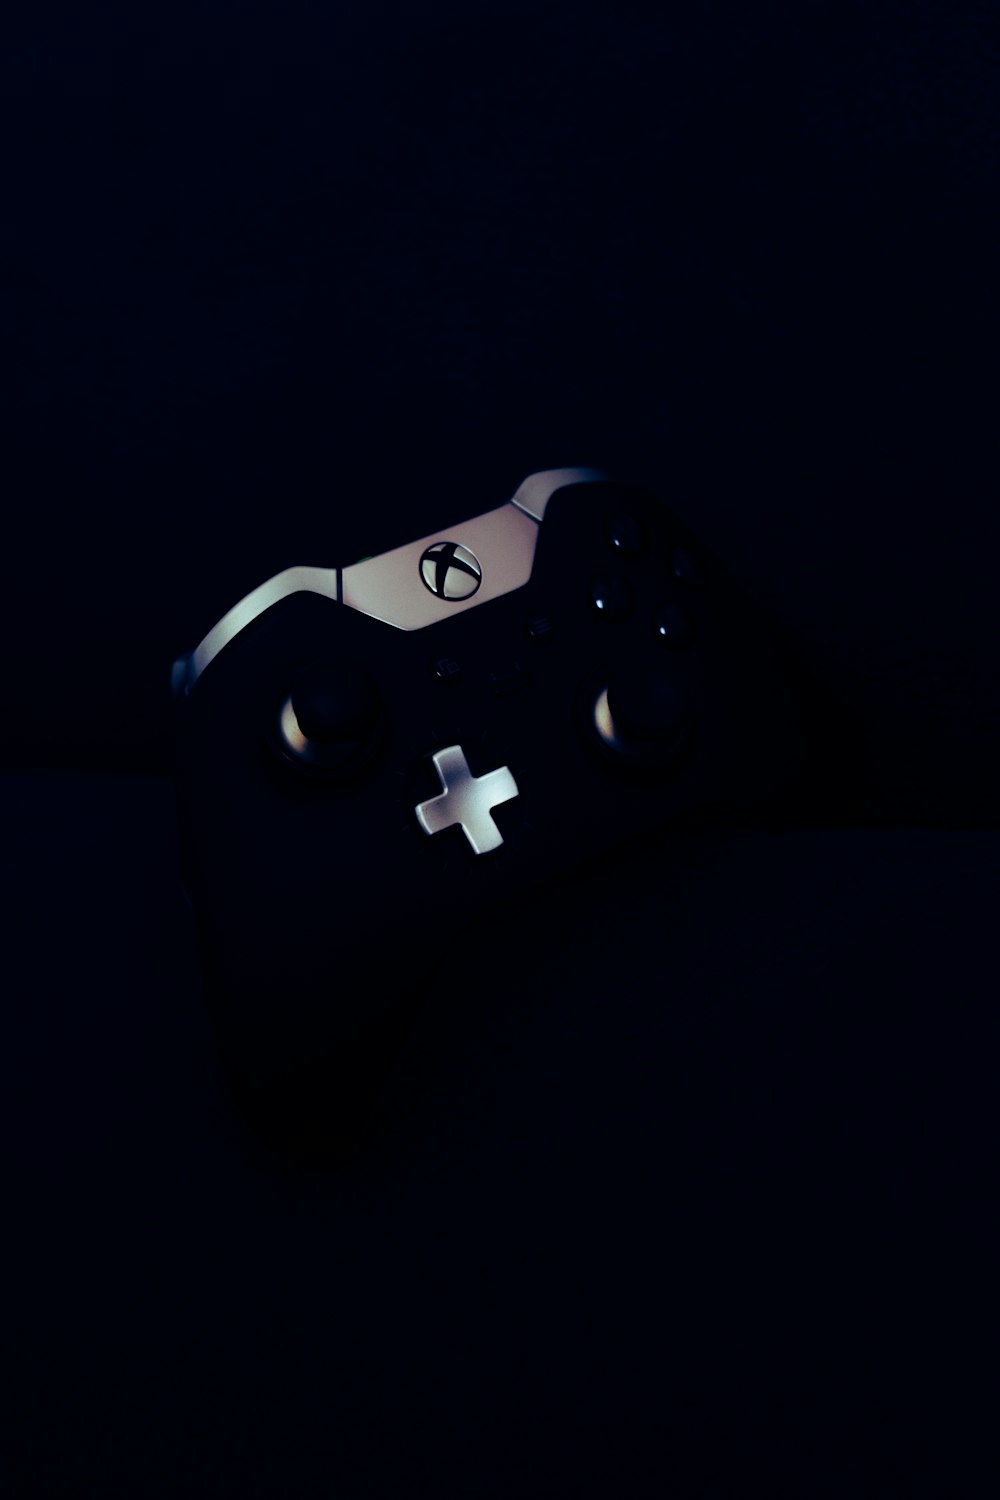 a close up of a controller in the dark